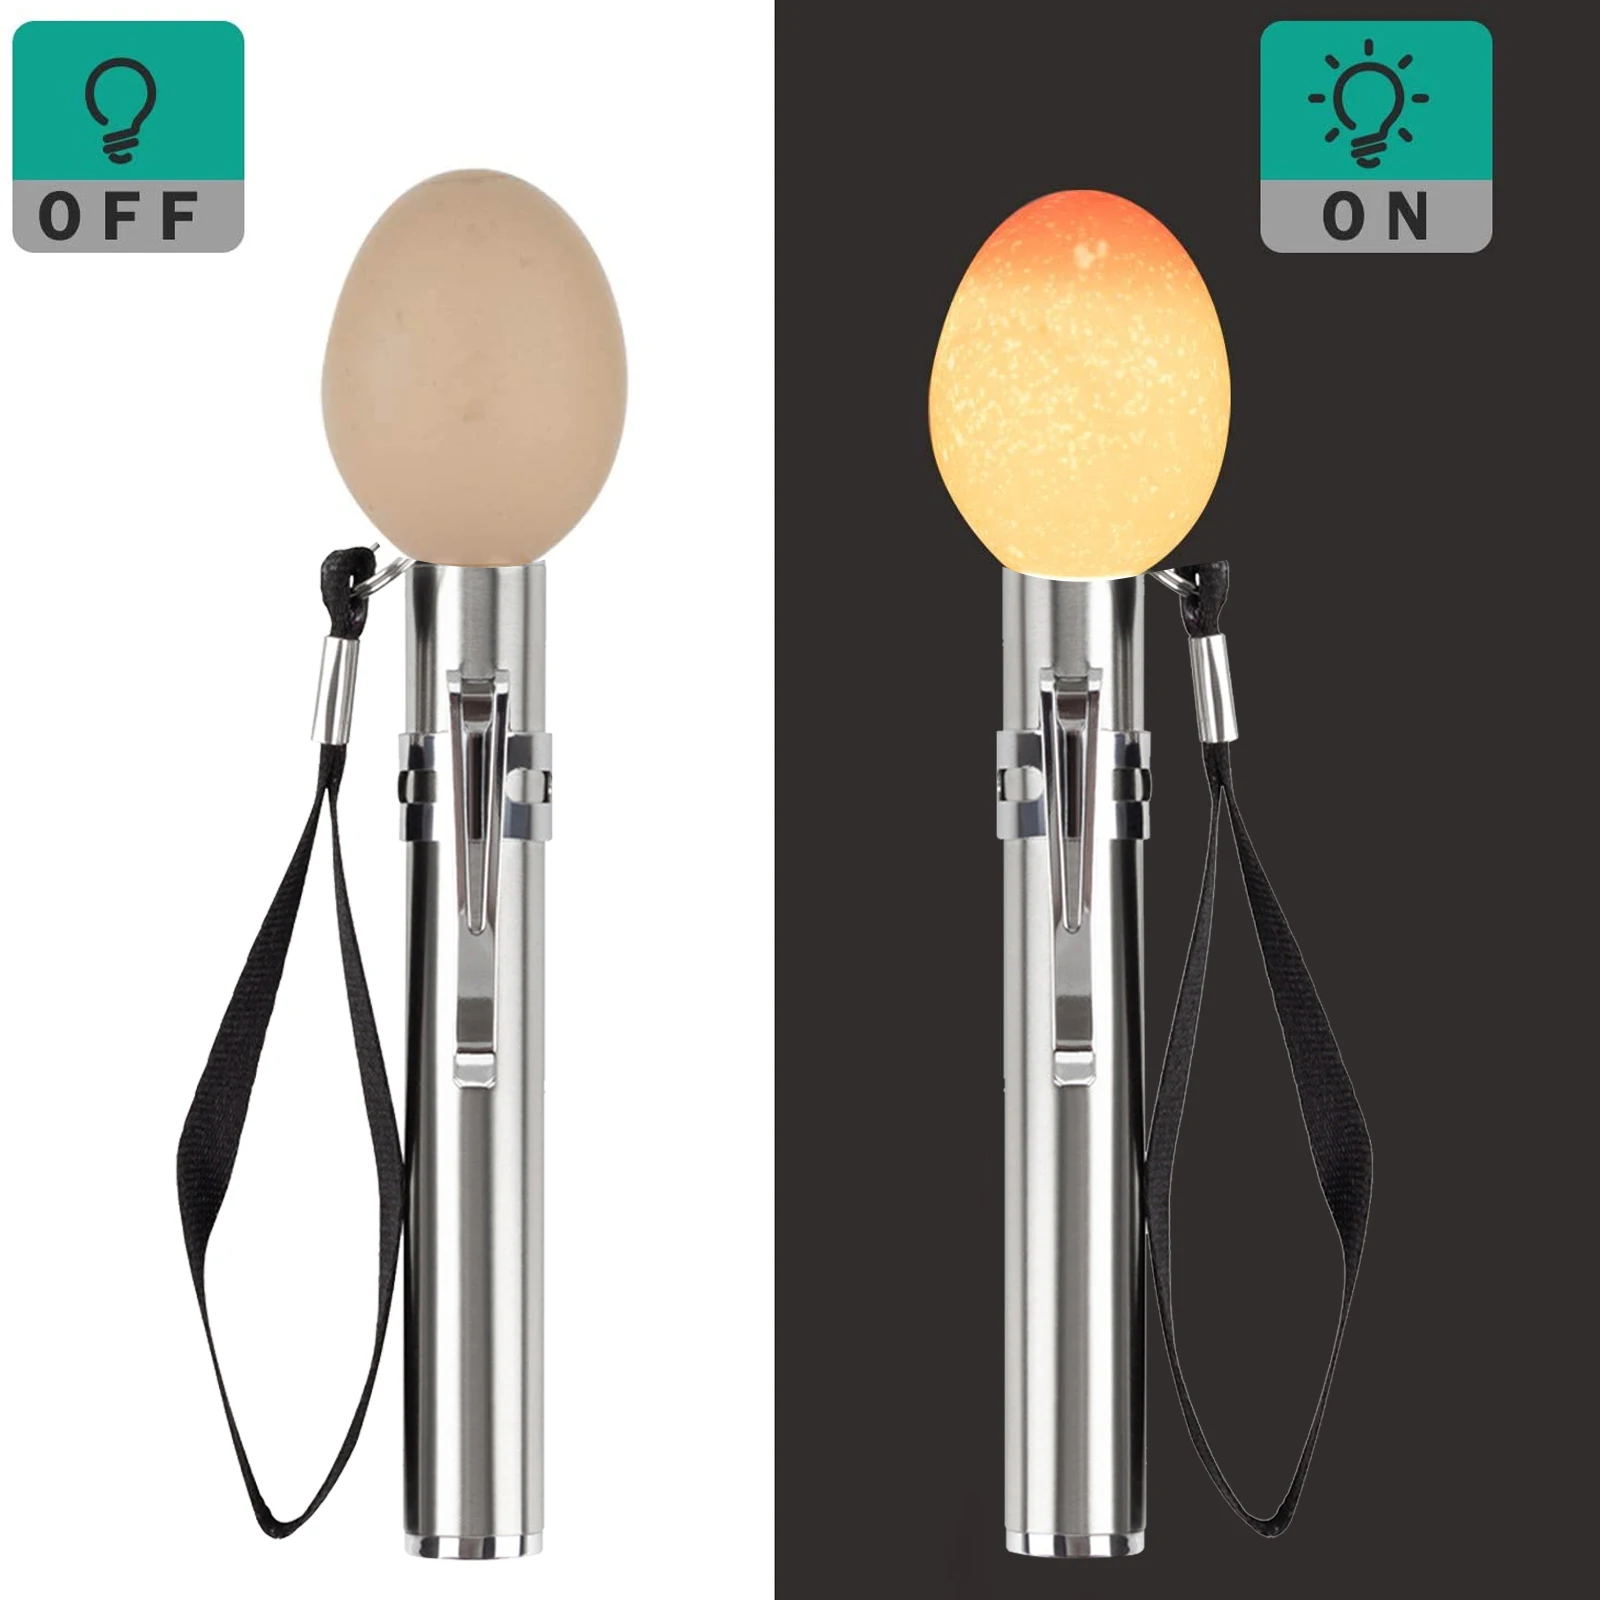 Flexzion Egg Candler Tester, Bright Cool LED Light Candling Lamp for All  Chicken Dark Quail Duck Canary Eggs, Portable Flashlight Incubator  w/Charger